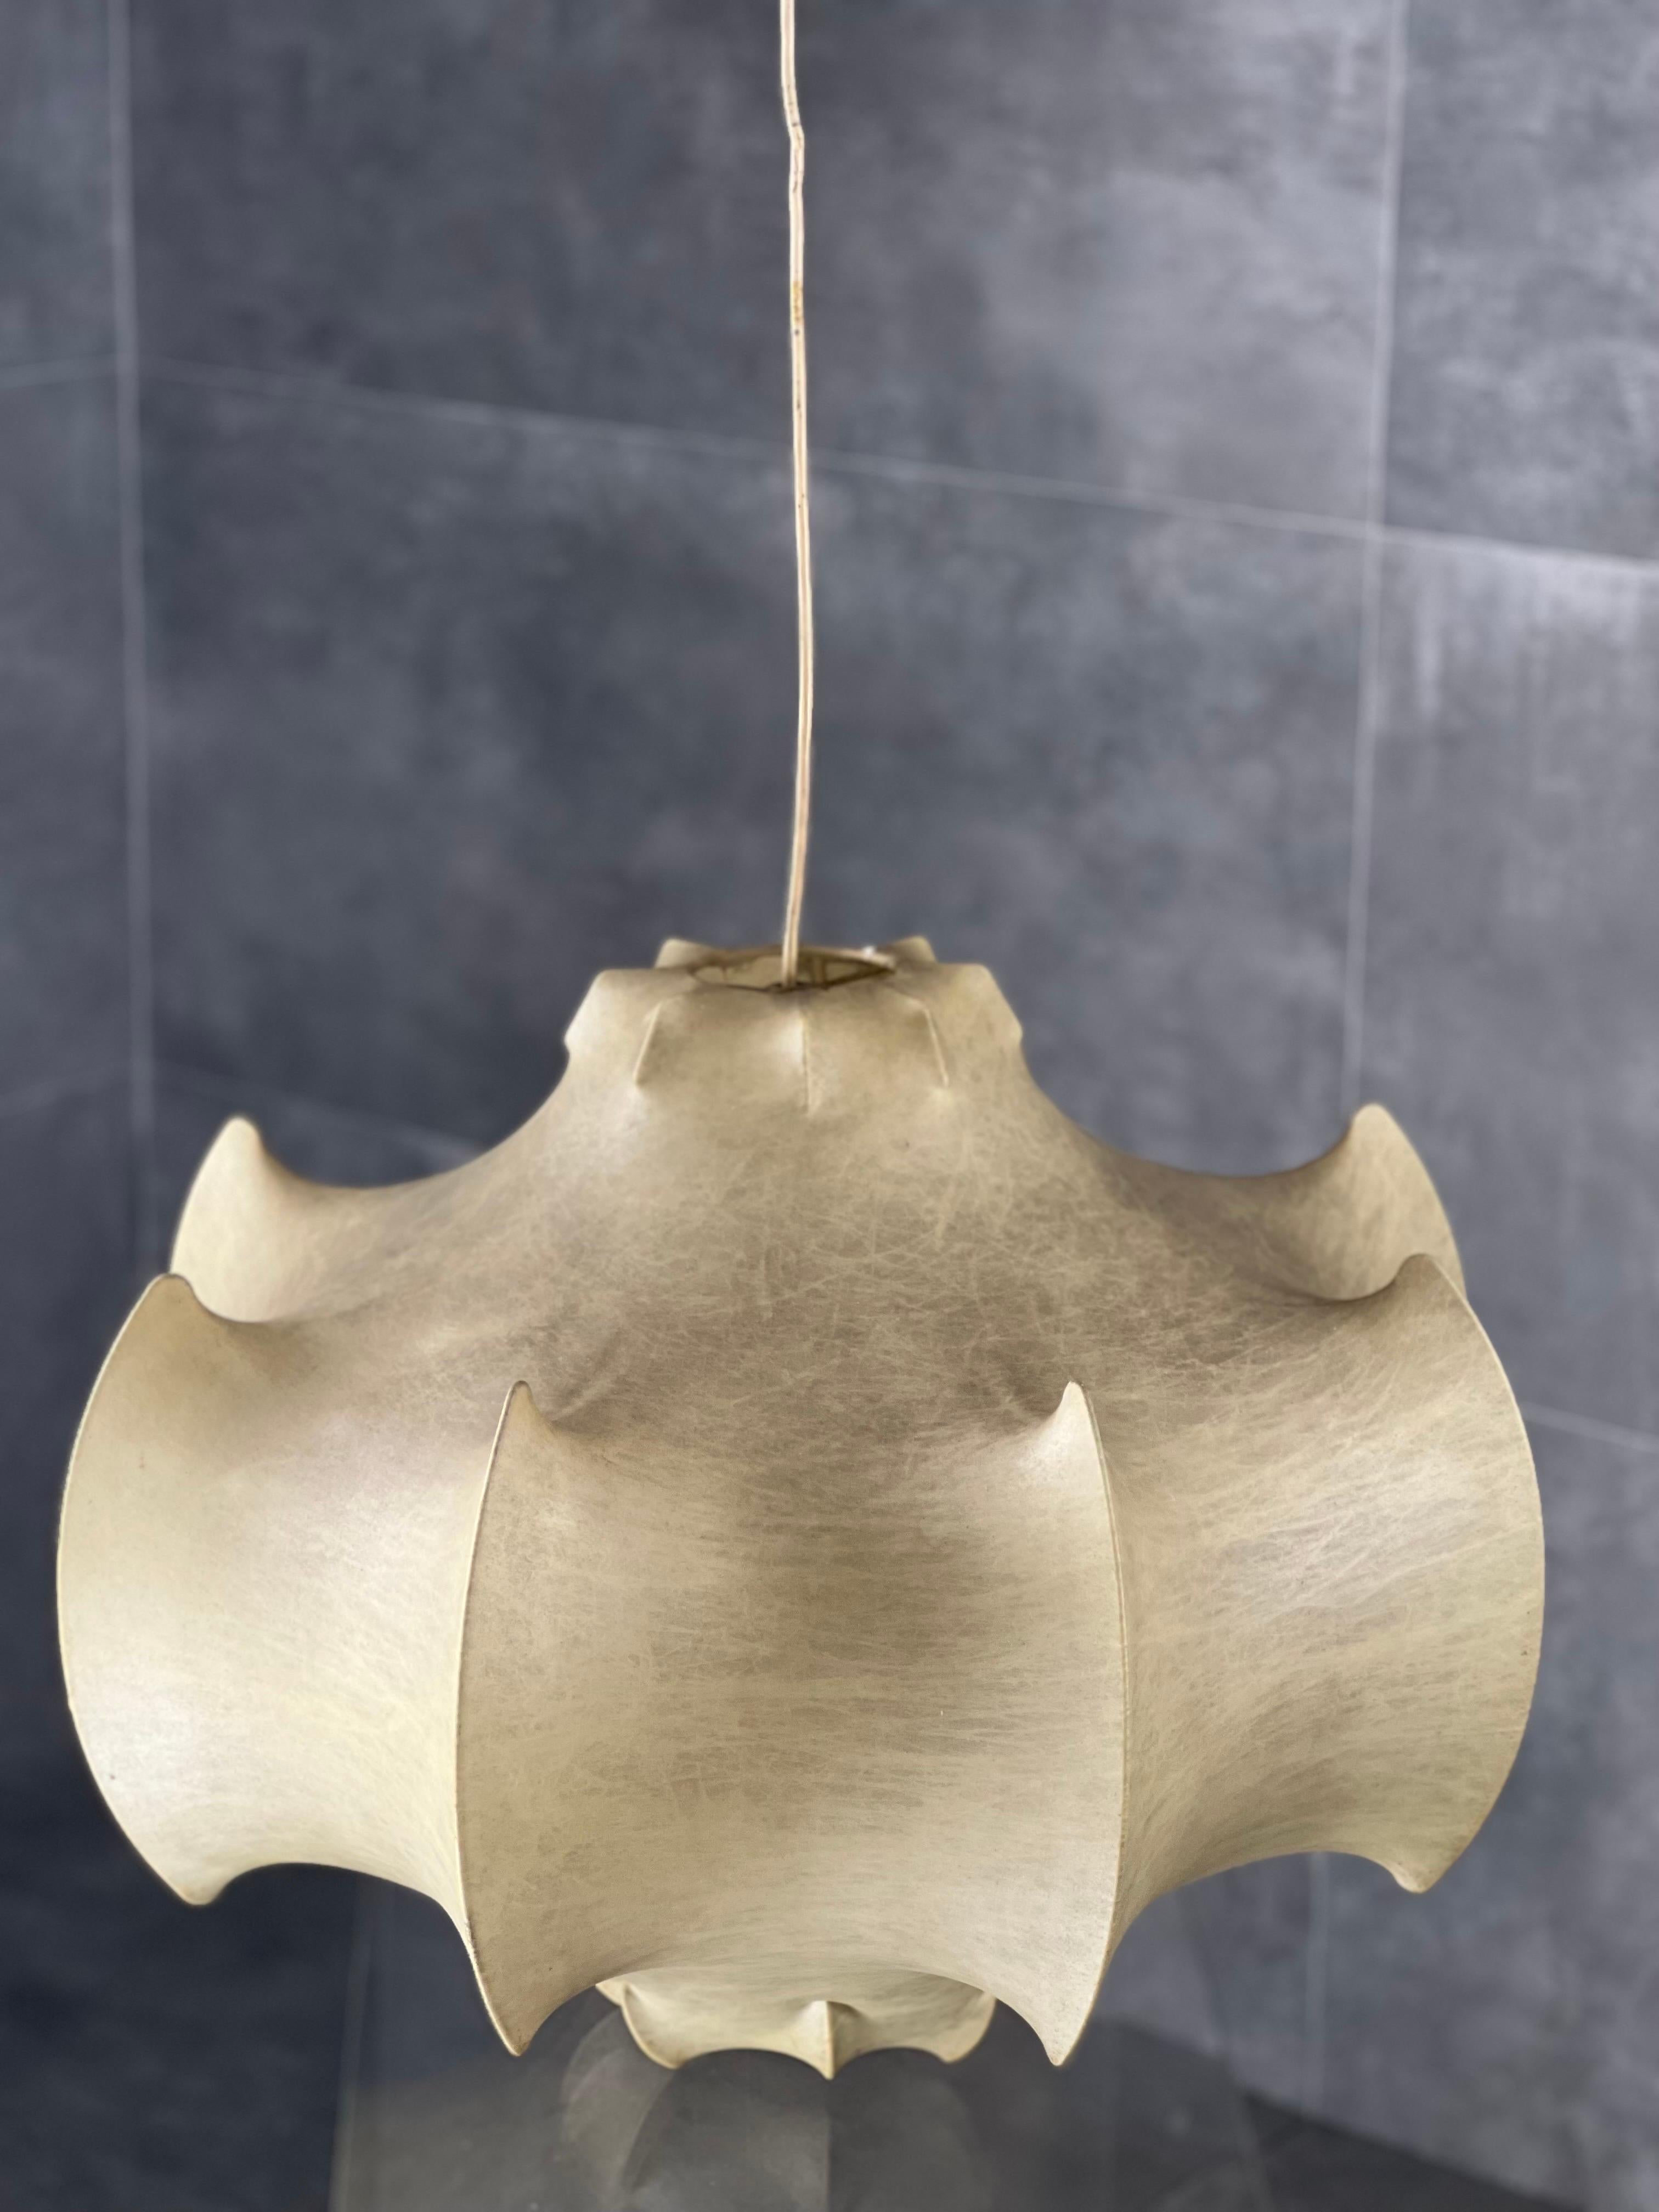 Suspension lamp made with cocoon technique, designed by Achille and Pier Giacomo Castiglioni and produced by Flos in Italy during the 1960s. 